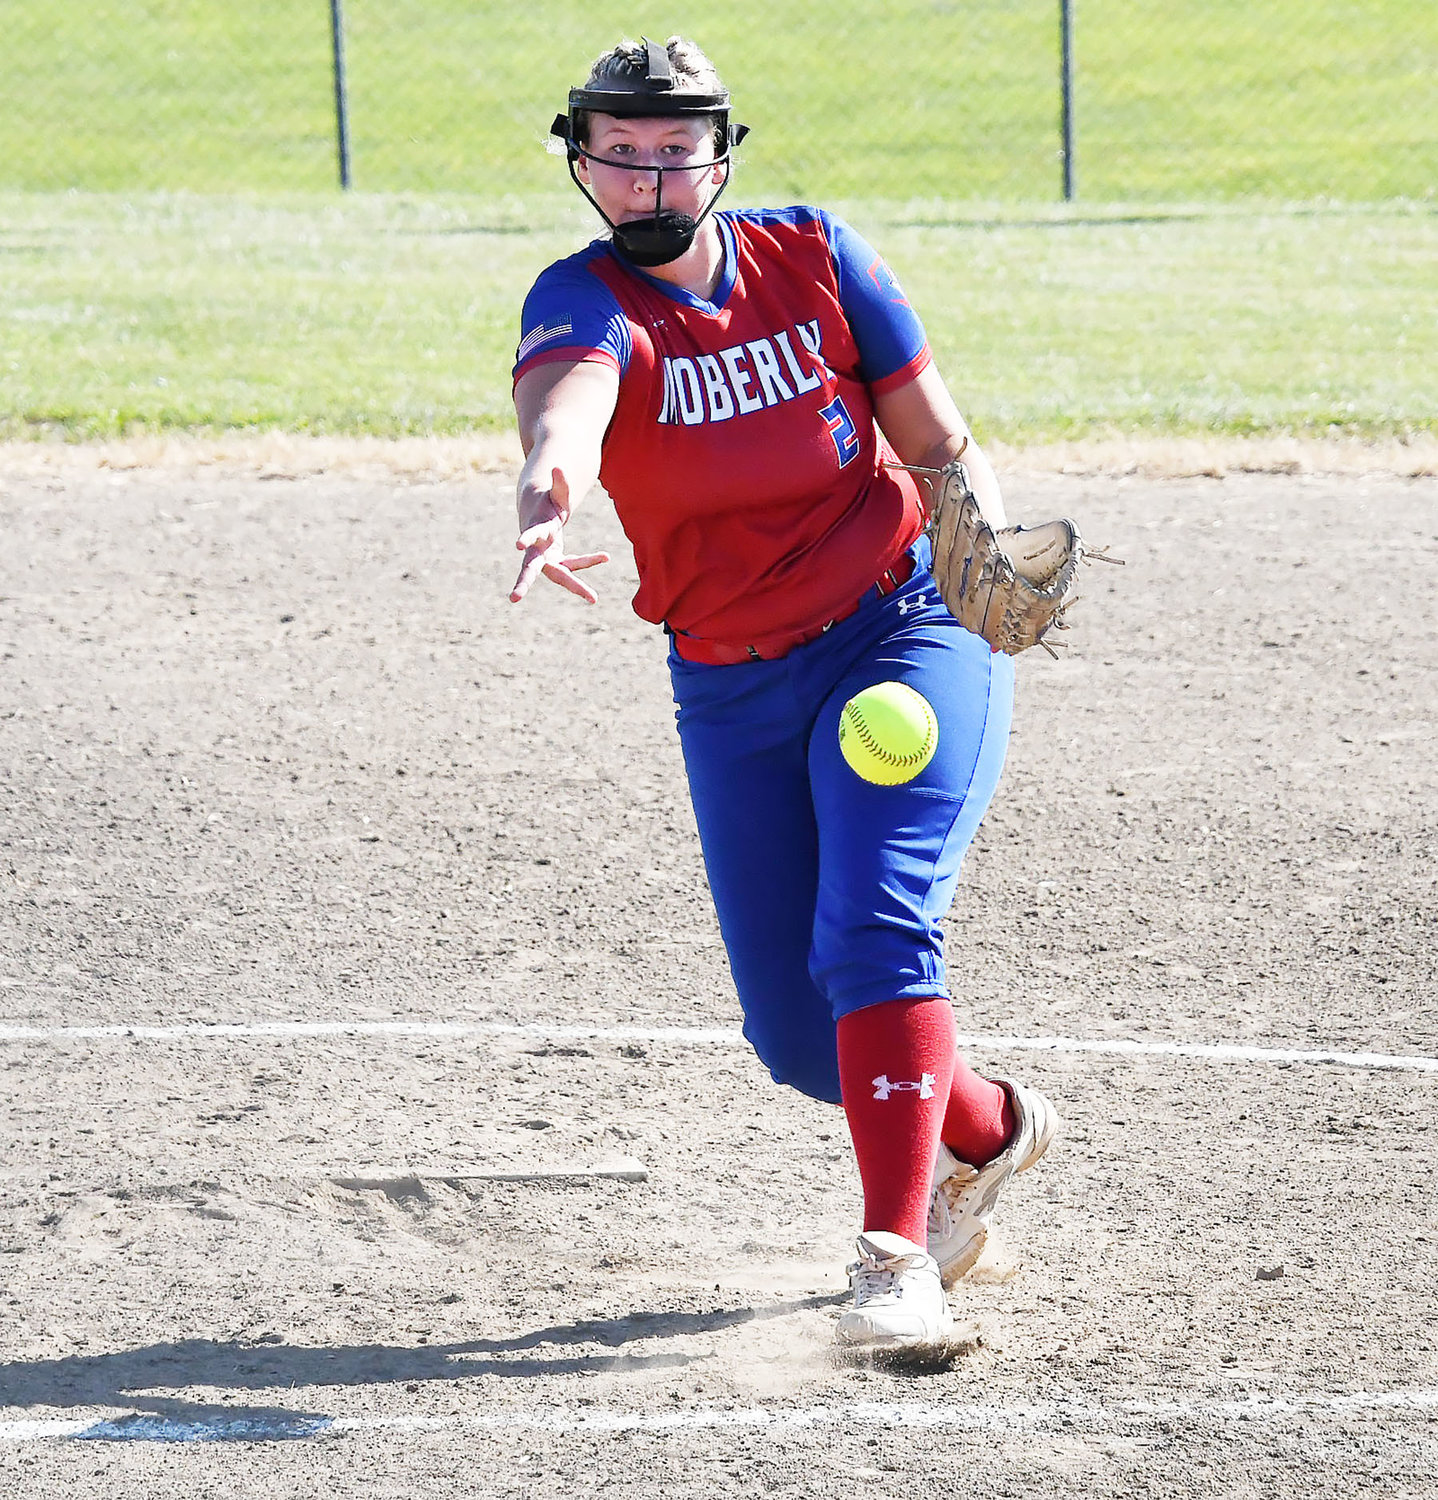 Taylor Martin of Moberly deals toward home plate in the jamboree game versus Macon.